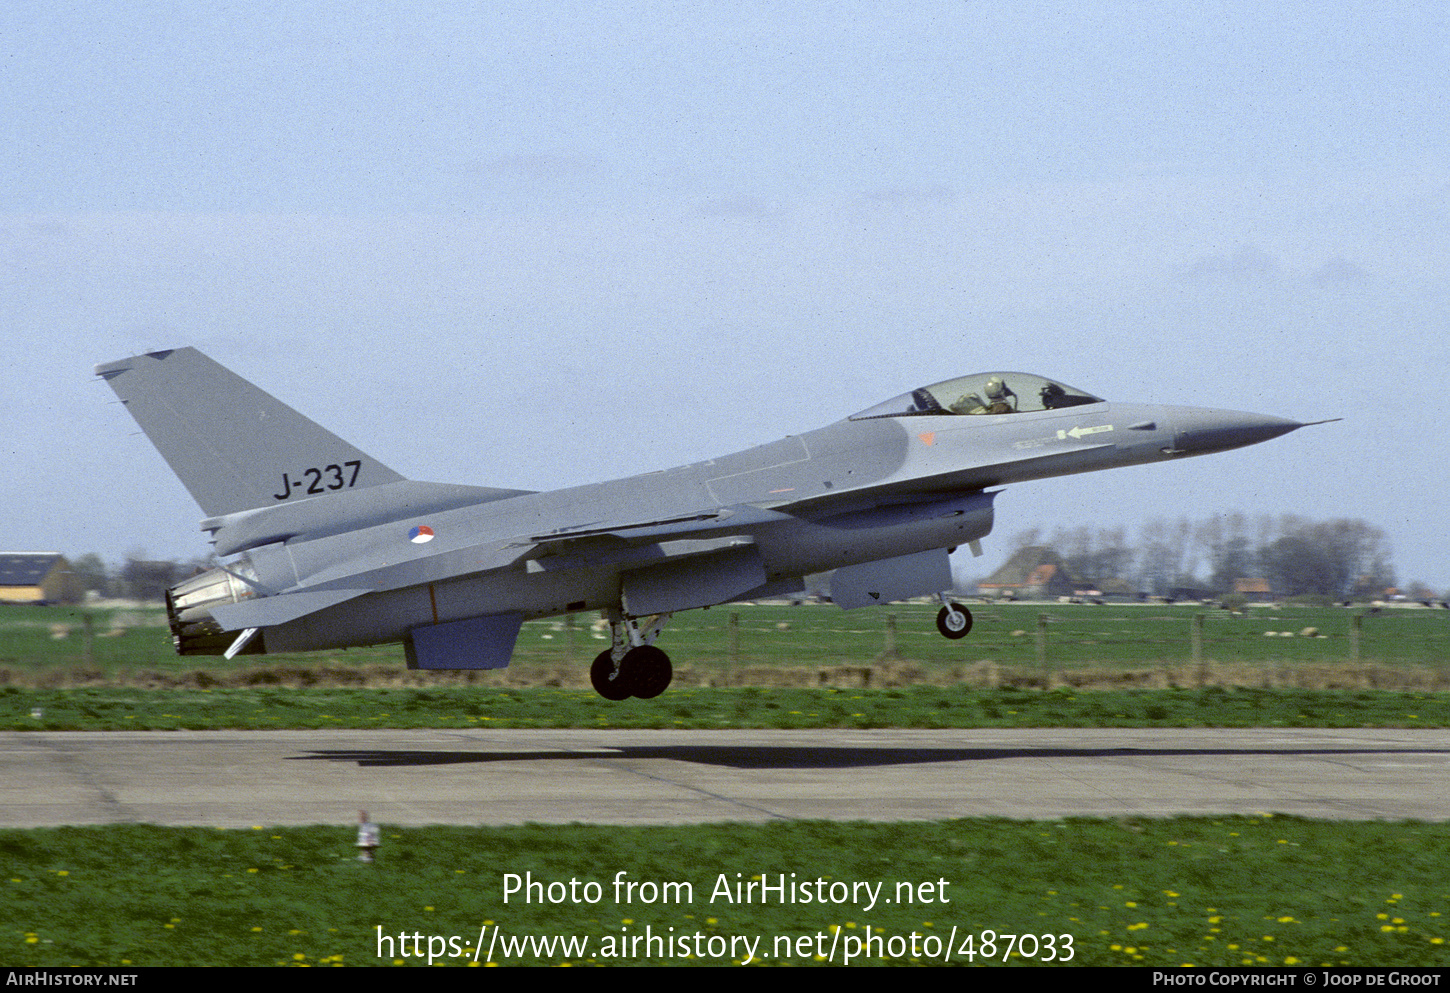 aircraft-photo-of-j-237-general-dynamics-f-16a-fighting-falcon